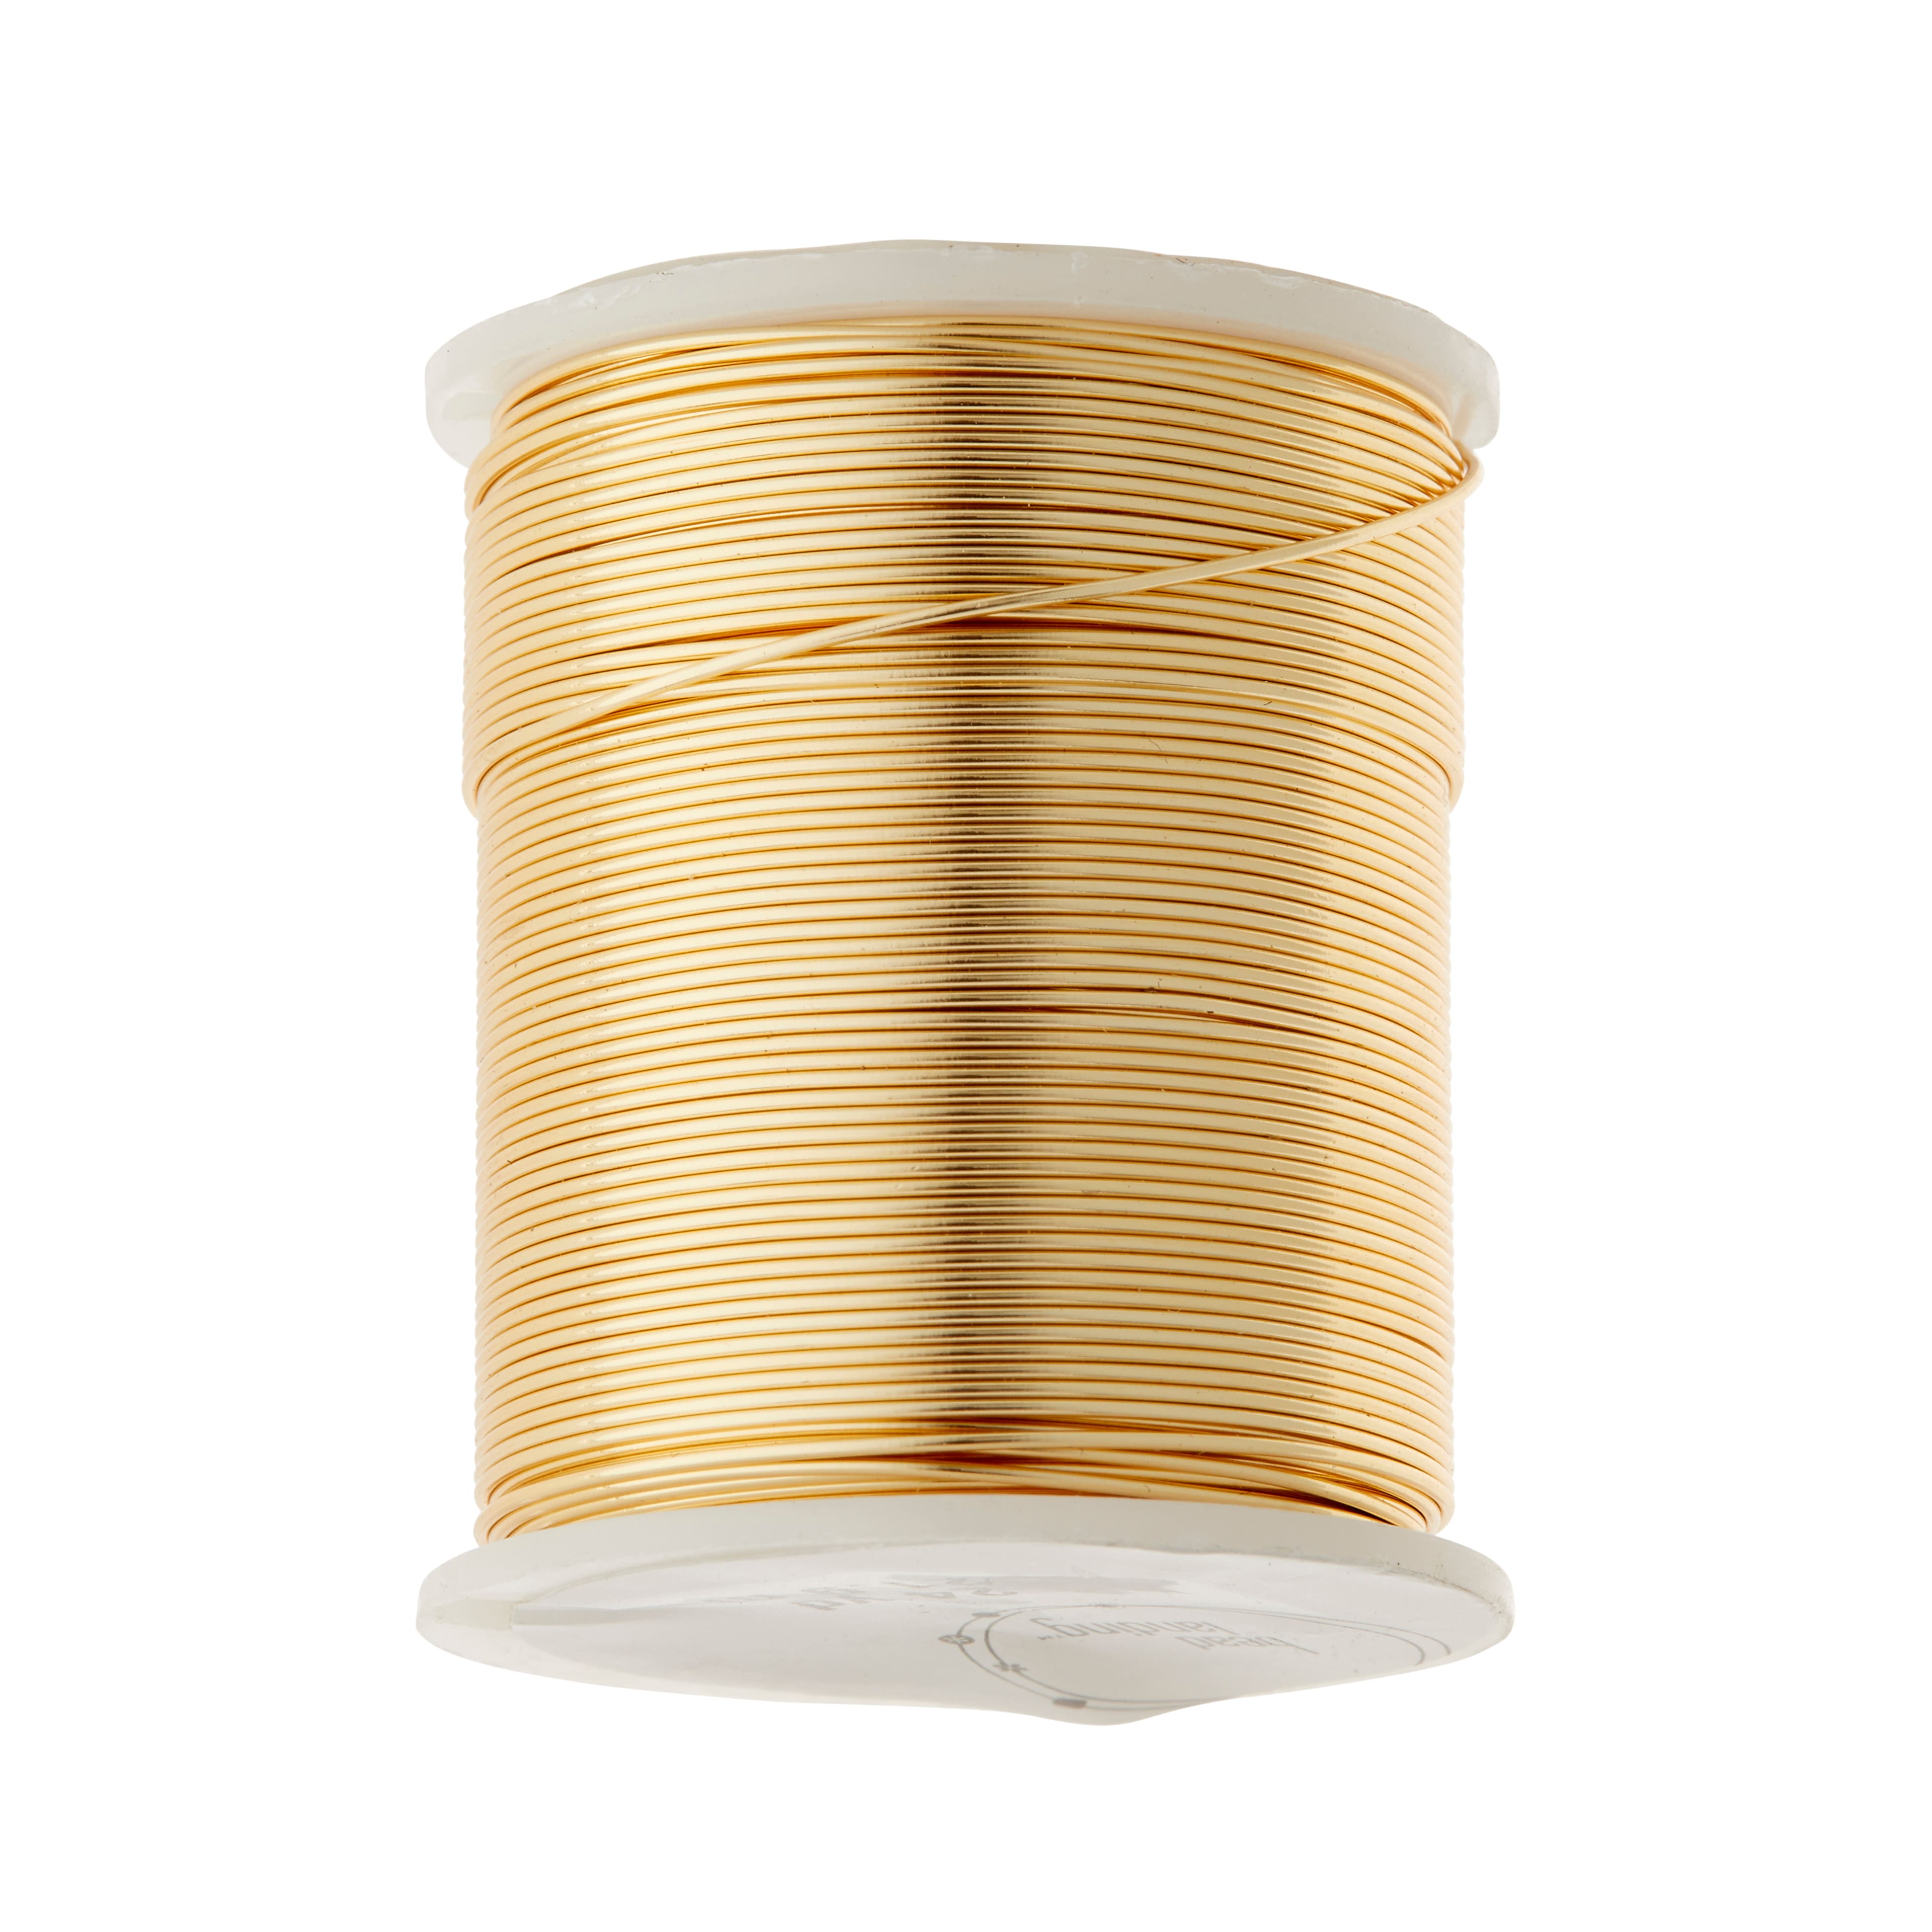 Craft Wire 24 Gauge GOLD PLATED 10 Yards by BeadSmith